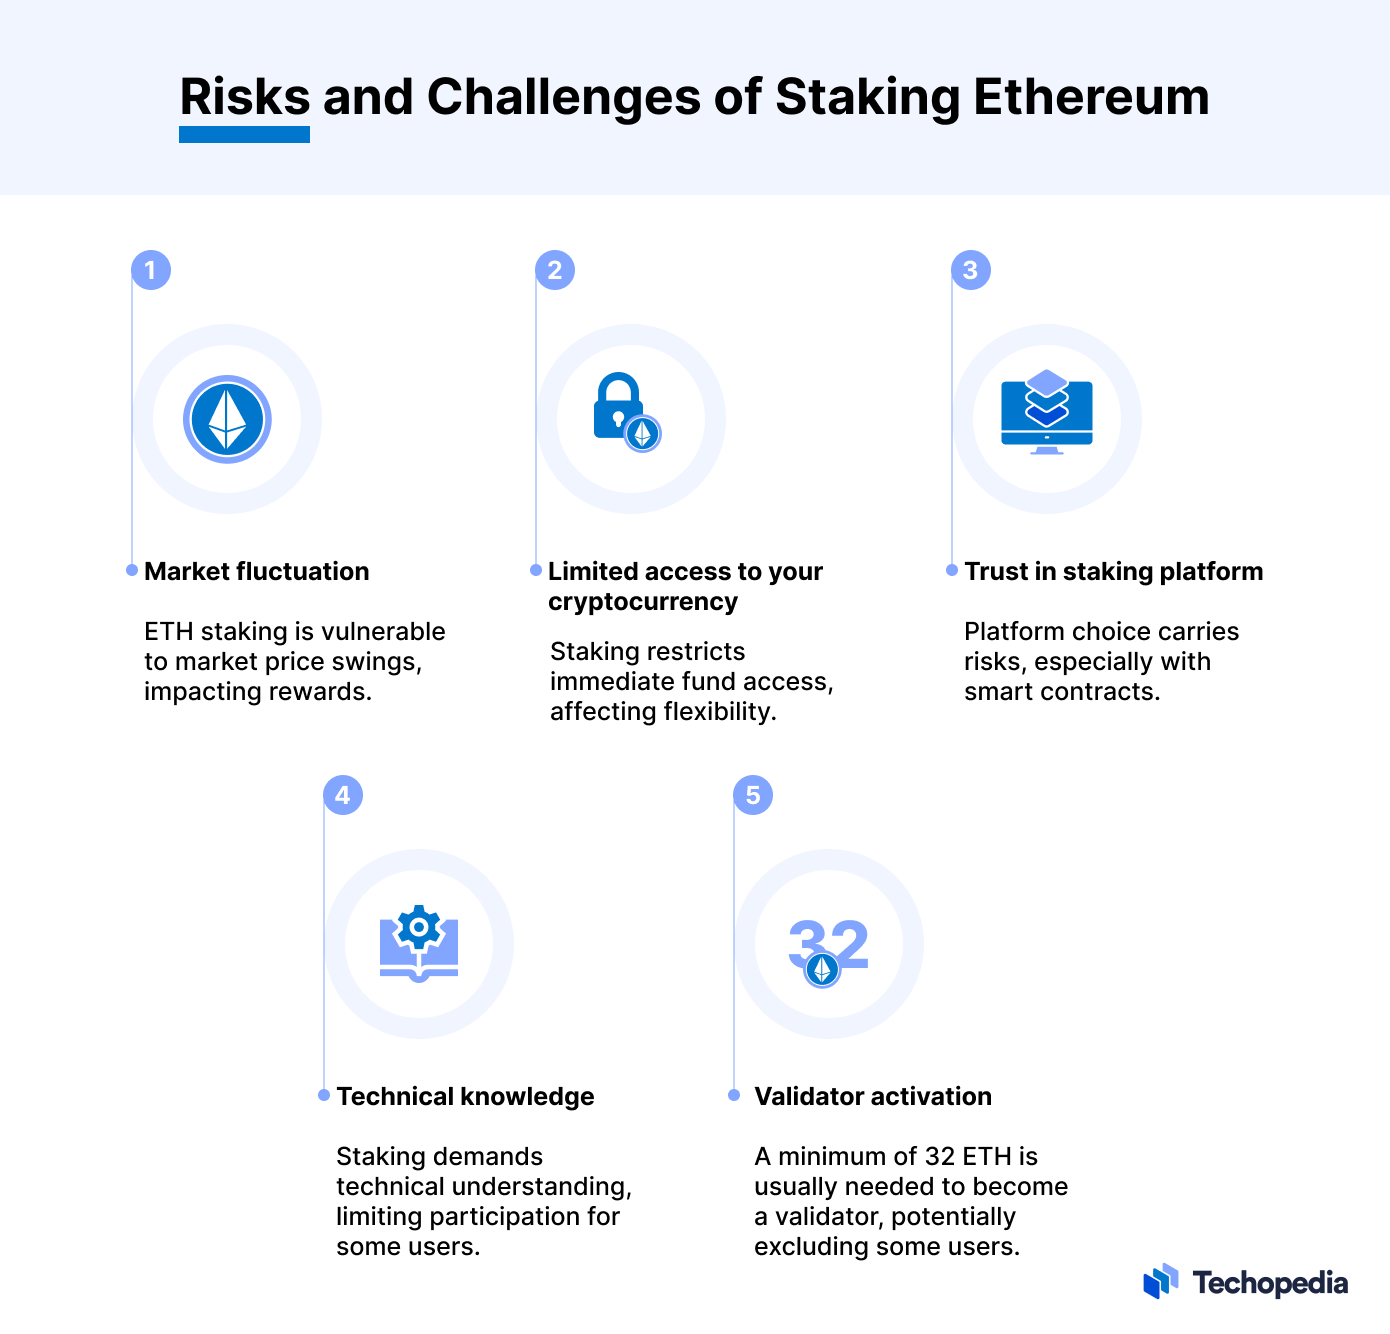 Risks and Challenges of Staking Ethereum